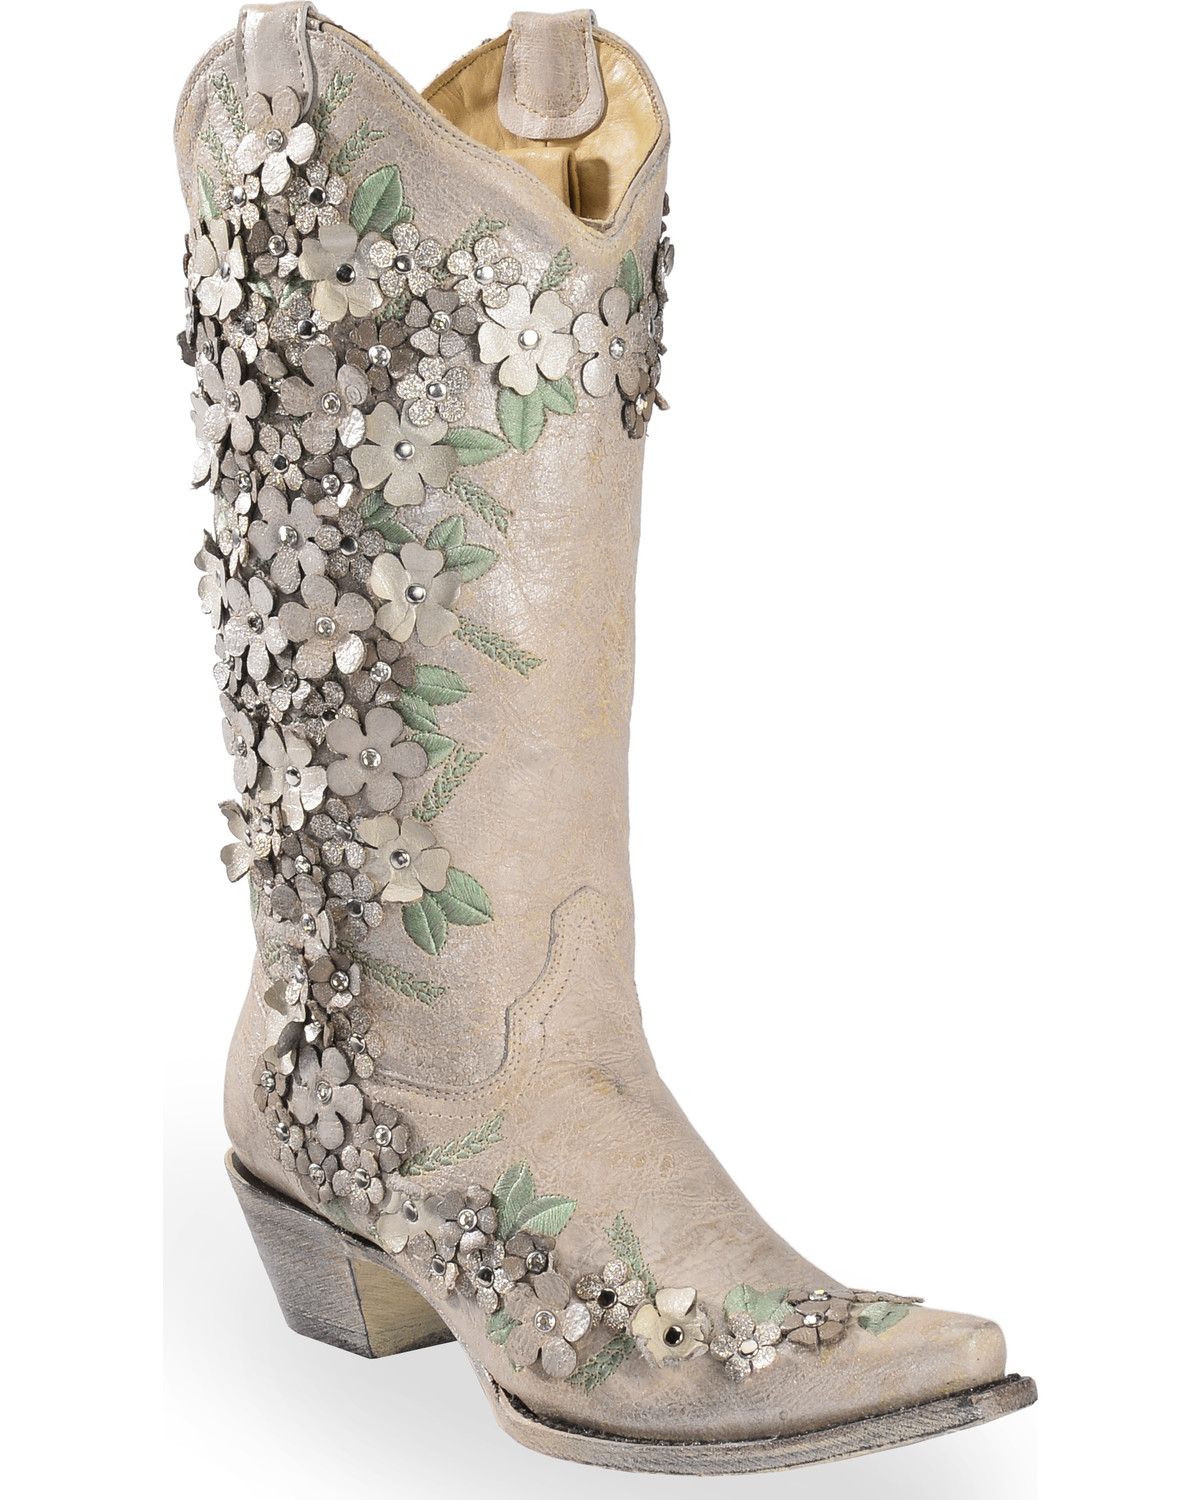 corral floral embroidered boots